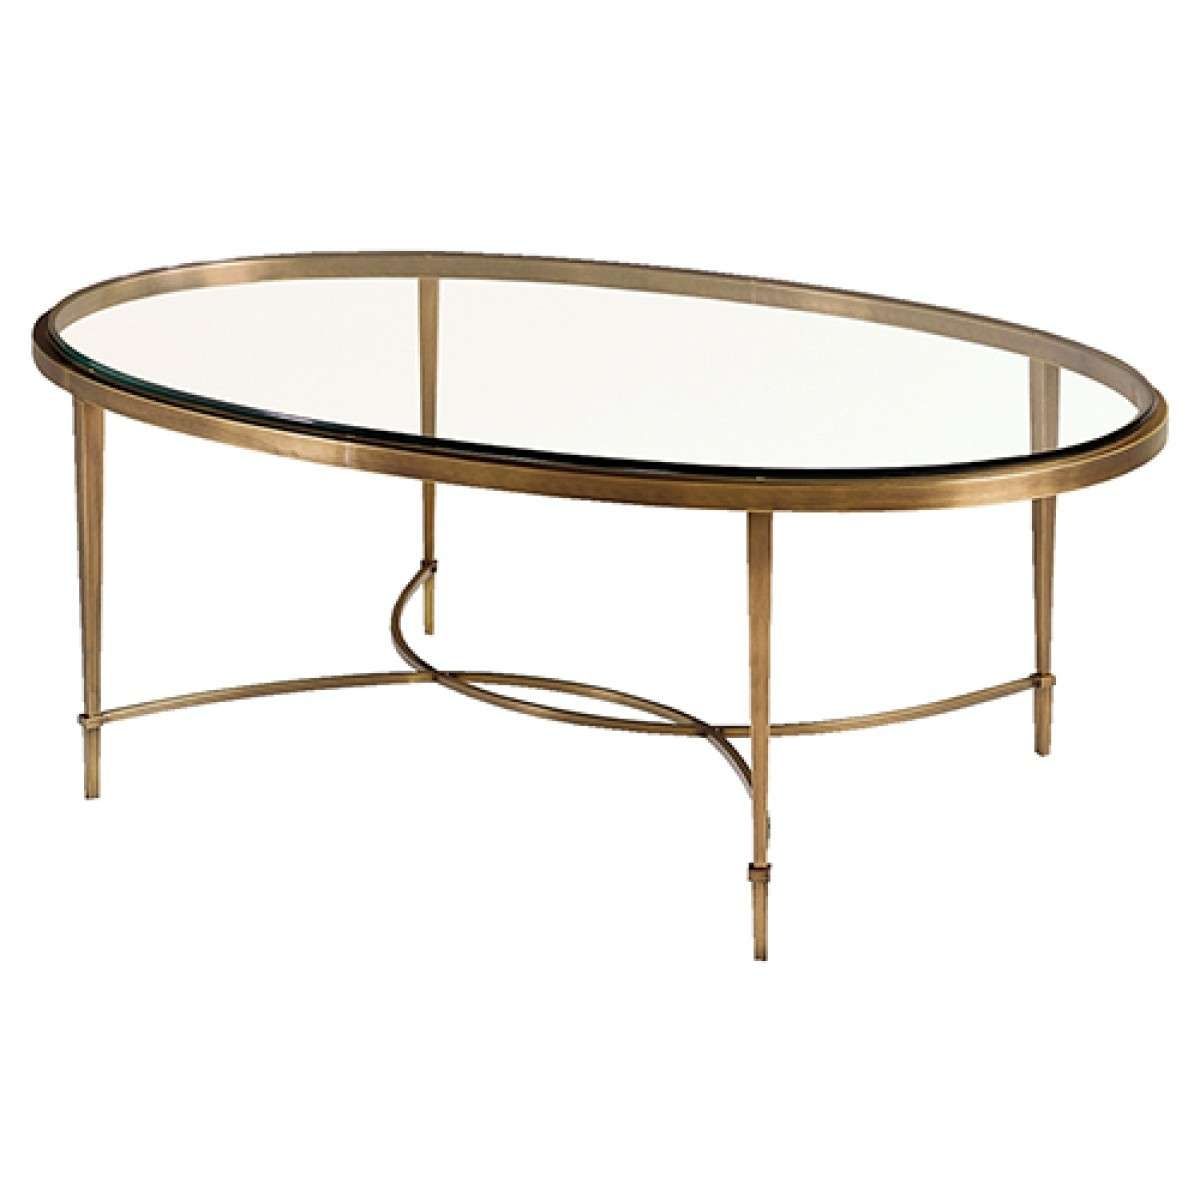 Most Popular Vintage Glass Coffee Tables Intended For Coffee Tables : Furniture Vintage Glass Top Coffee Table With (View 7 of 20)